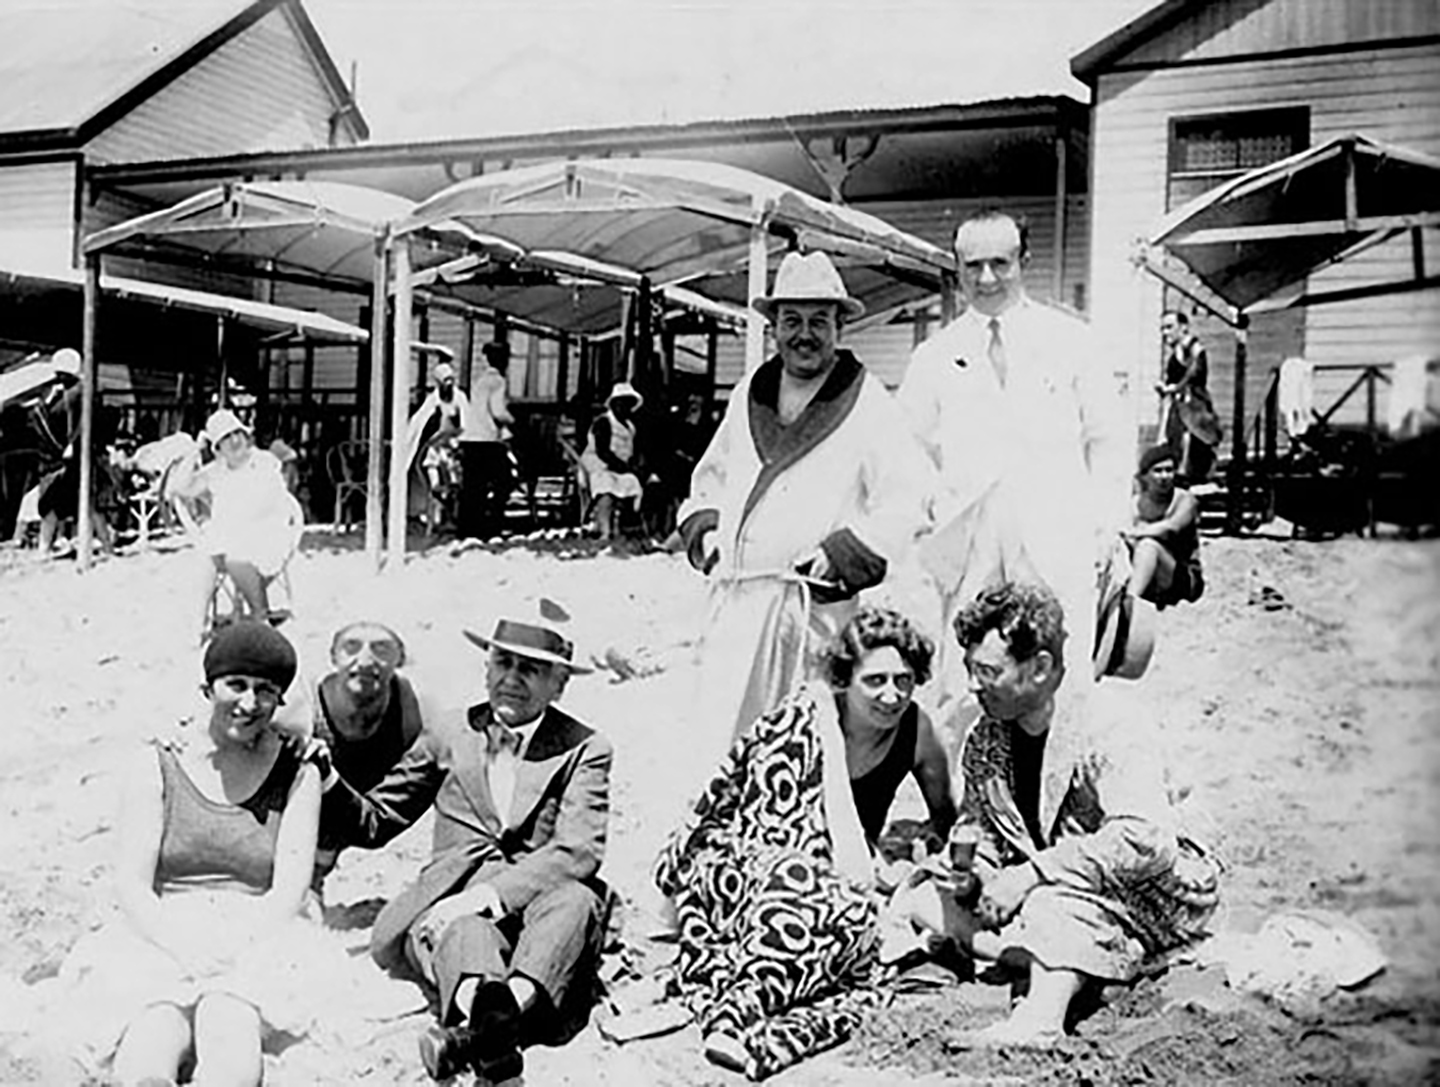 a group of beachgoers in the 1930s